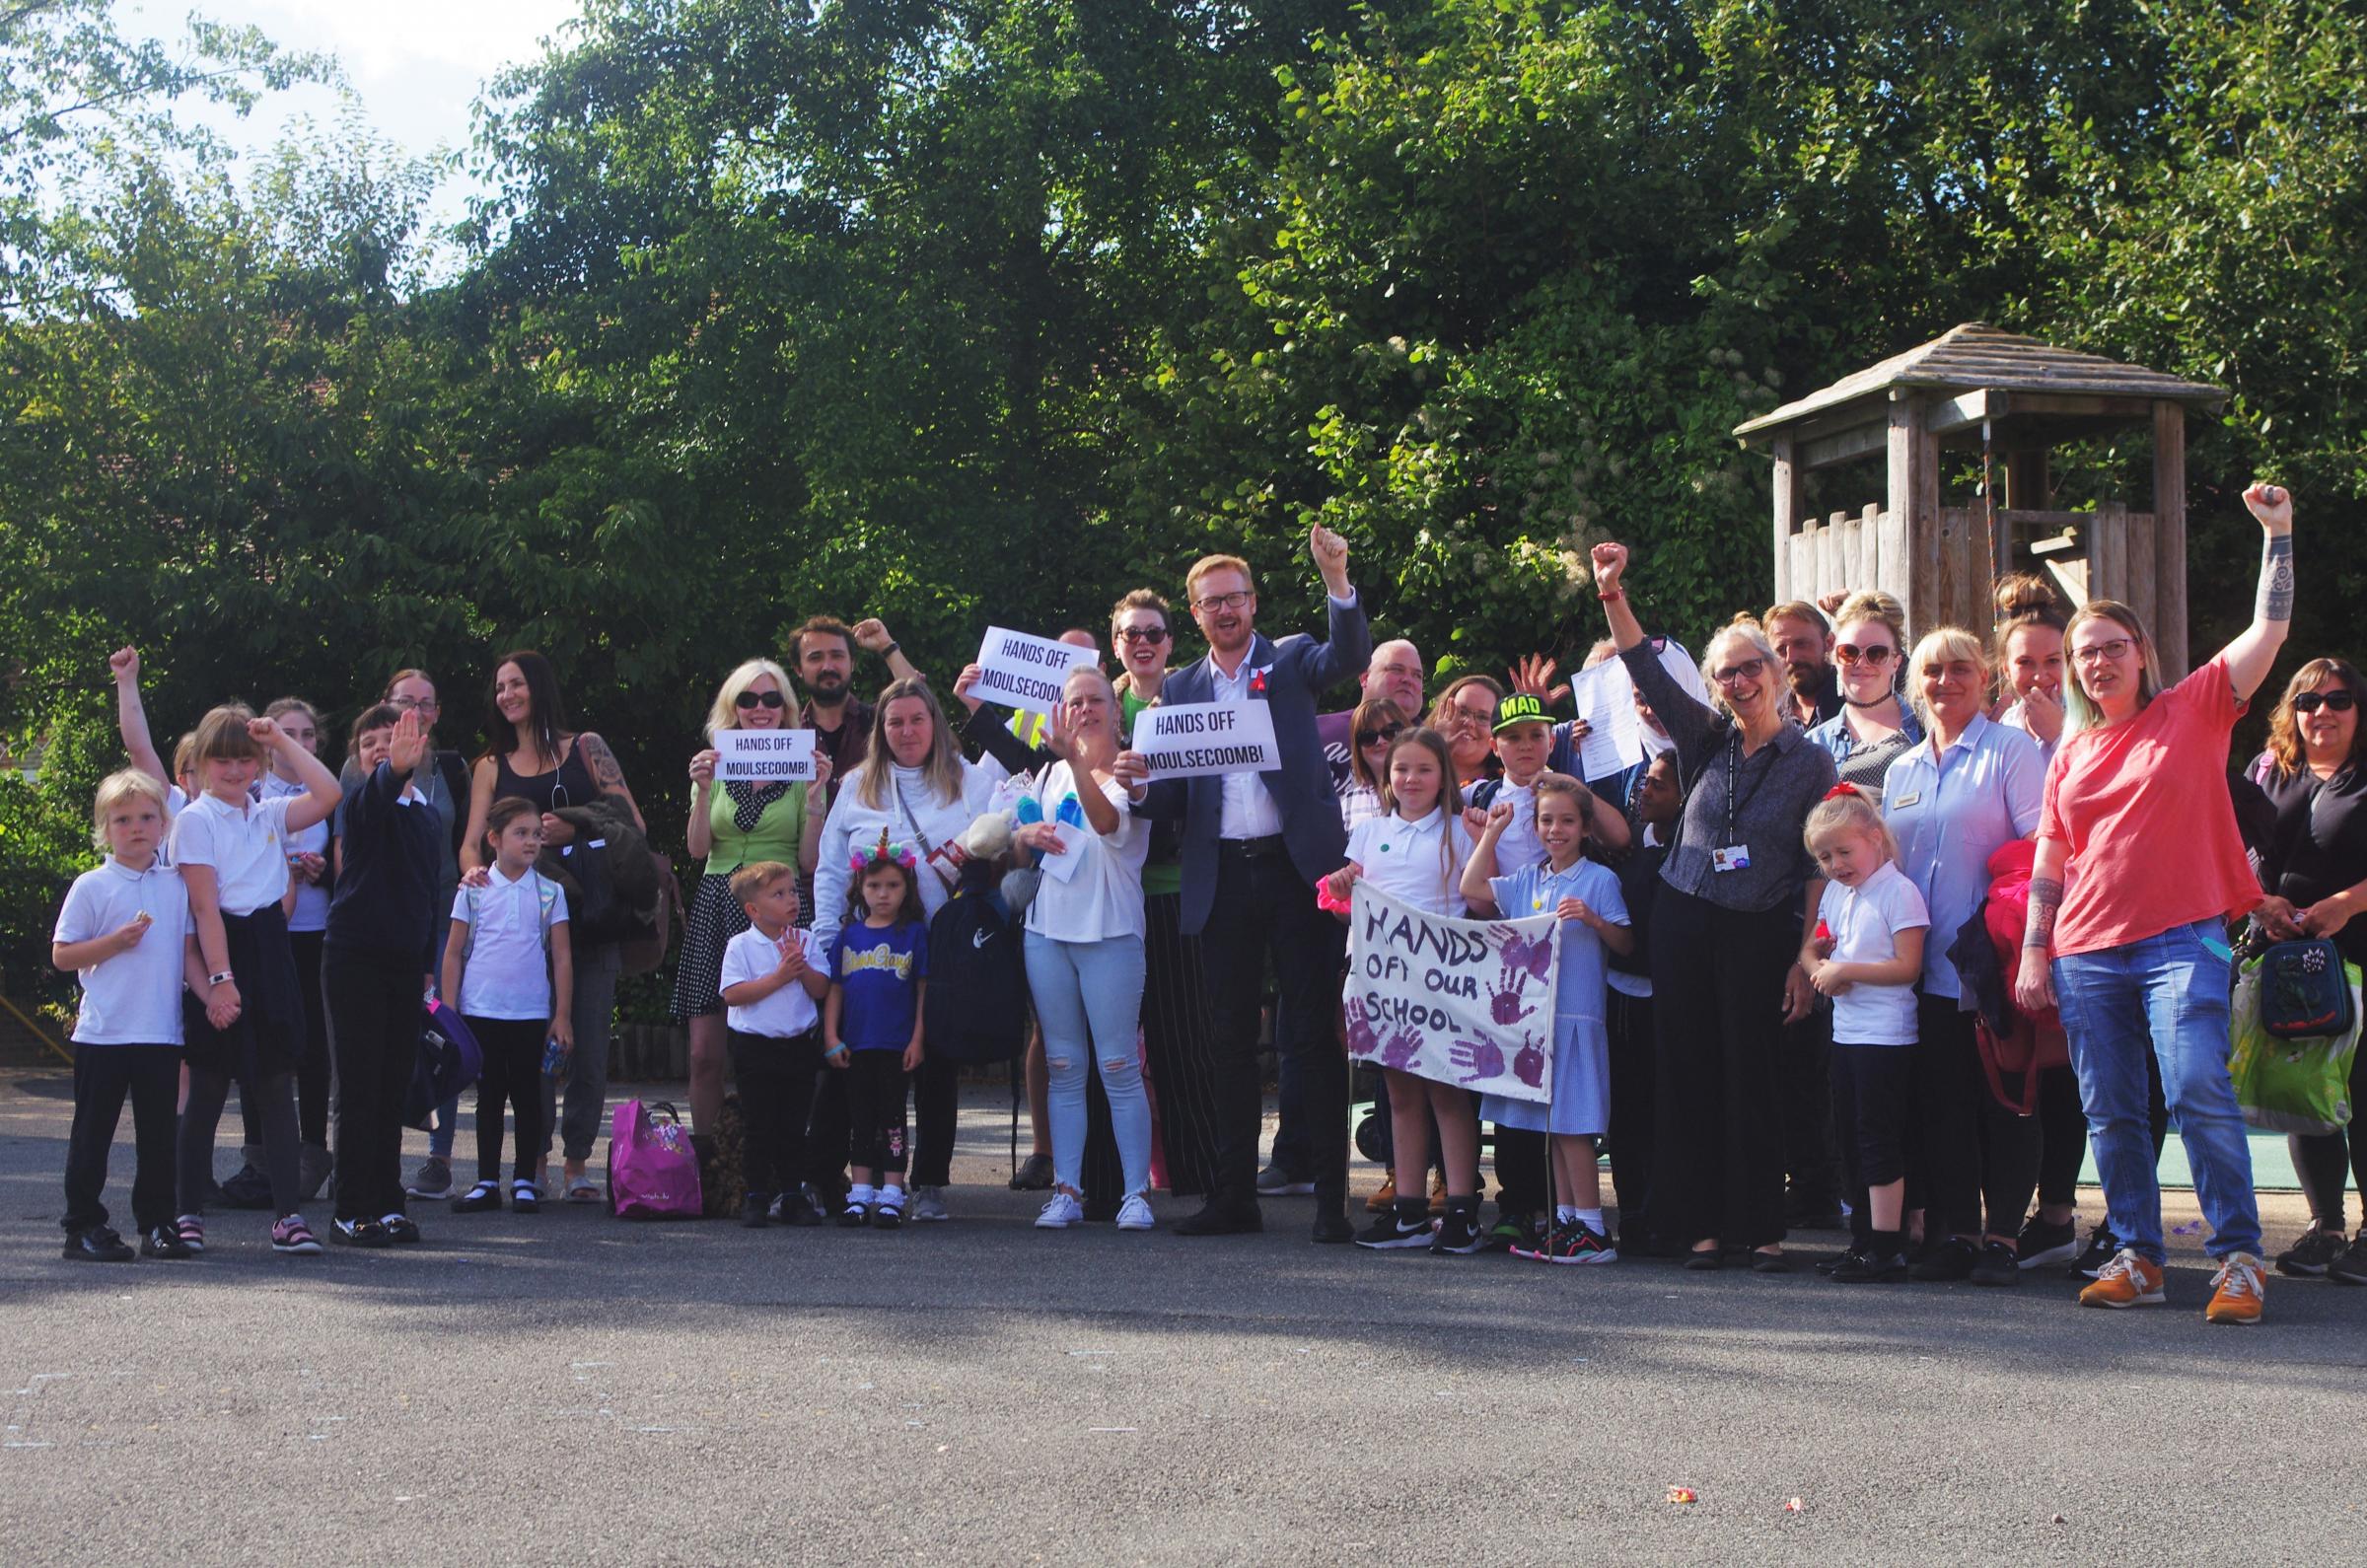 Campaigners have rallied against academy plans for Moulsecoomb Primary school since last May